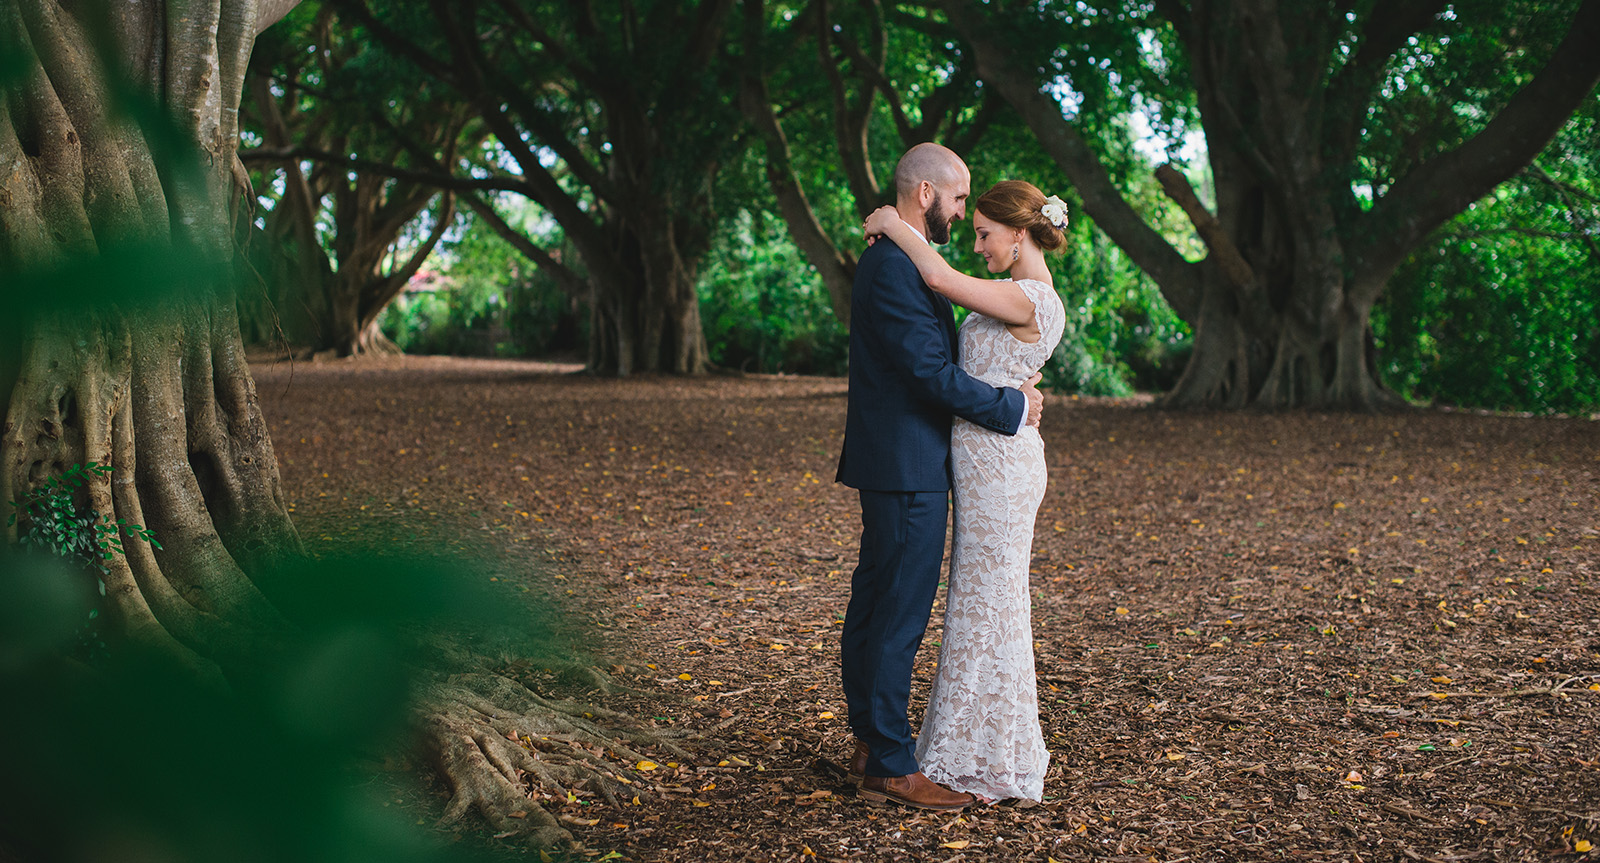 Lionheart Photography are Brisbane and Melbourne wedding photographers.